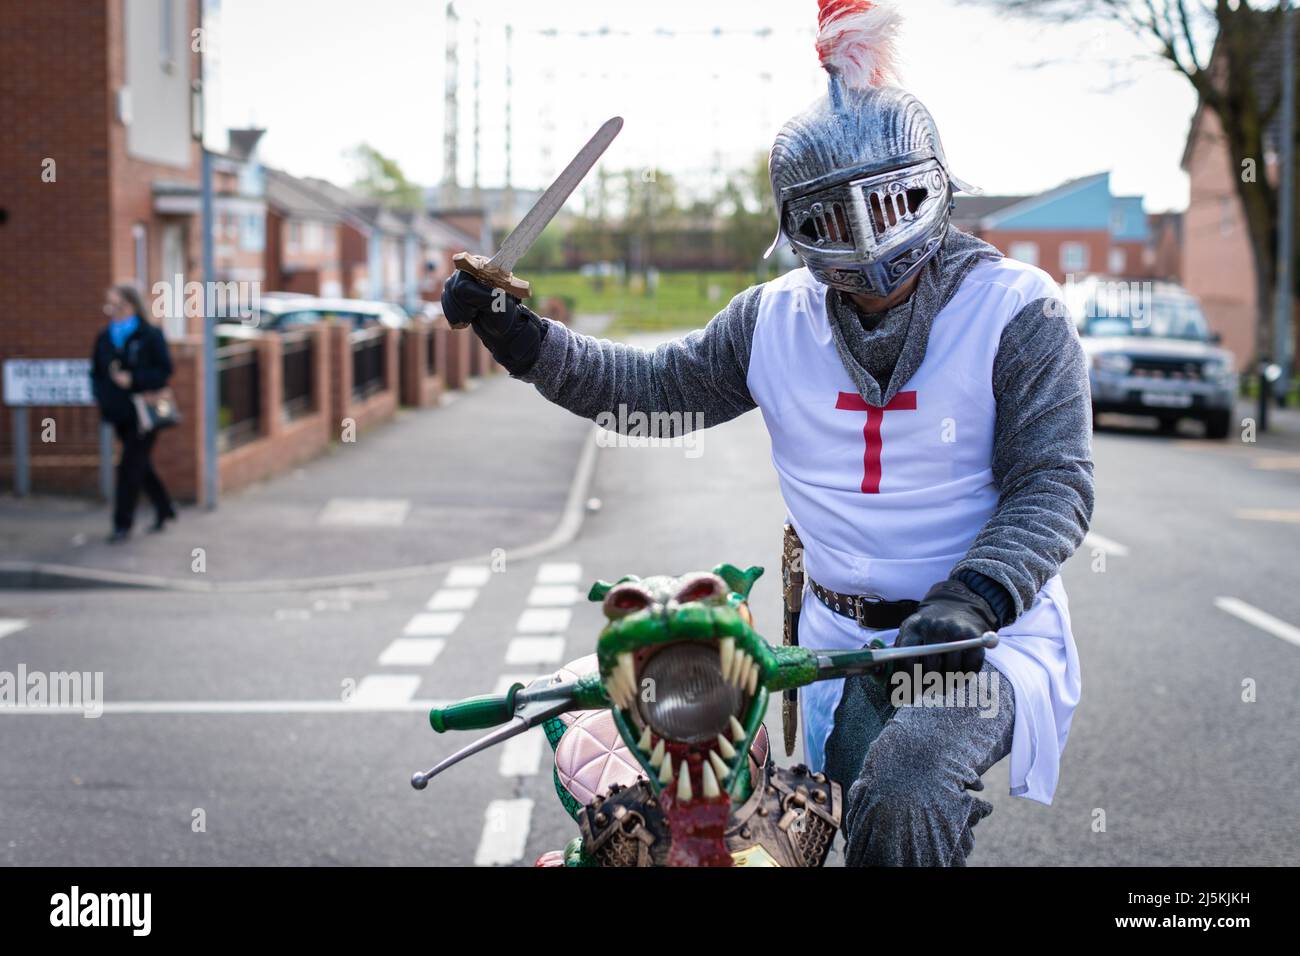 Manchester, UK. 24th Apr, 2022. A man dressed in a knights outfit awaits the start of the annual St Georges Day celebration which marks the death of the patron Saint Of England.ÊAndy Barton/Alamy Live News Credit: Andy Barton/Alamy Live News Stock Photo